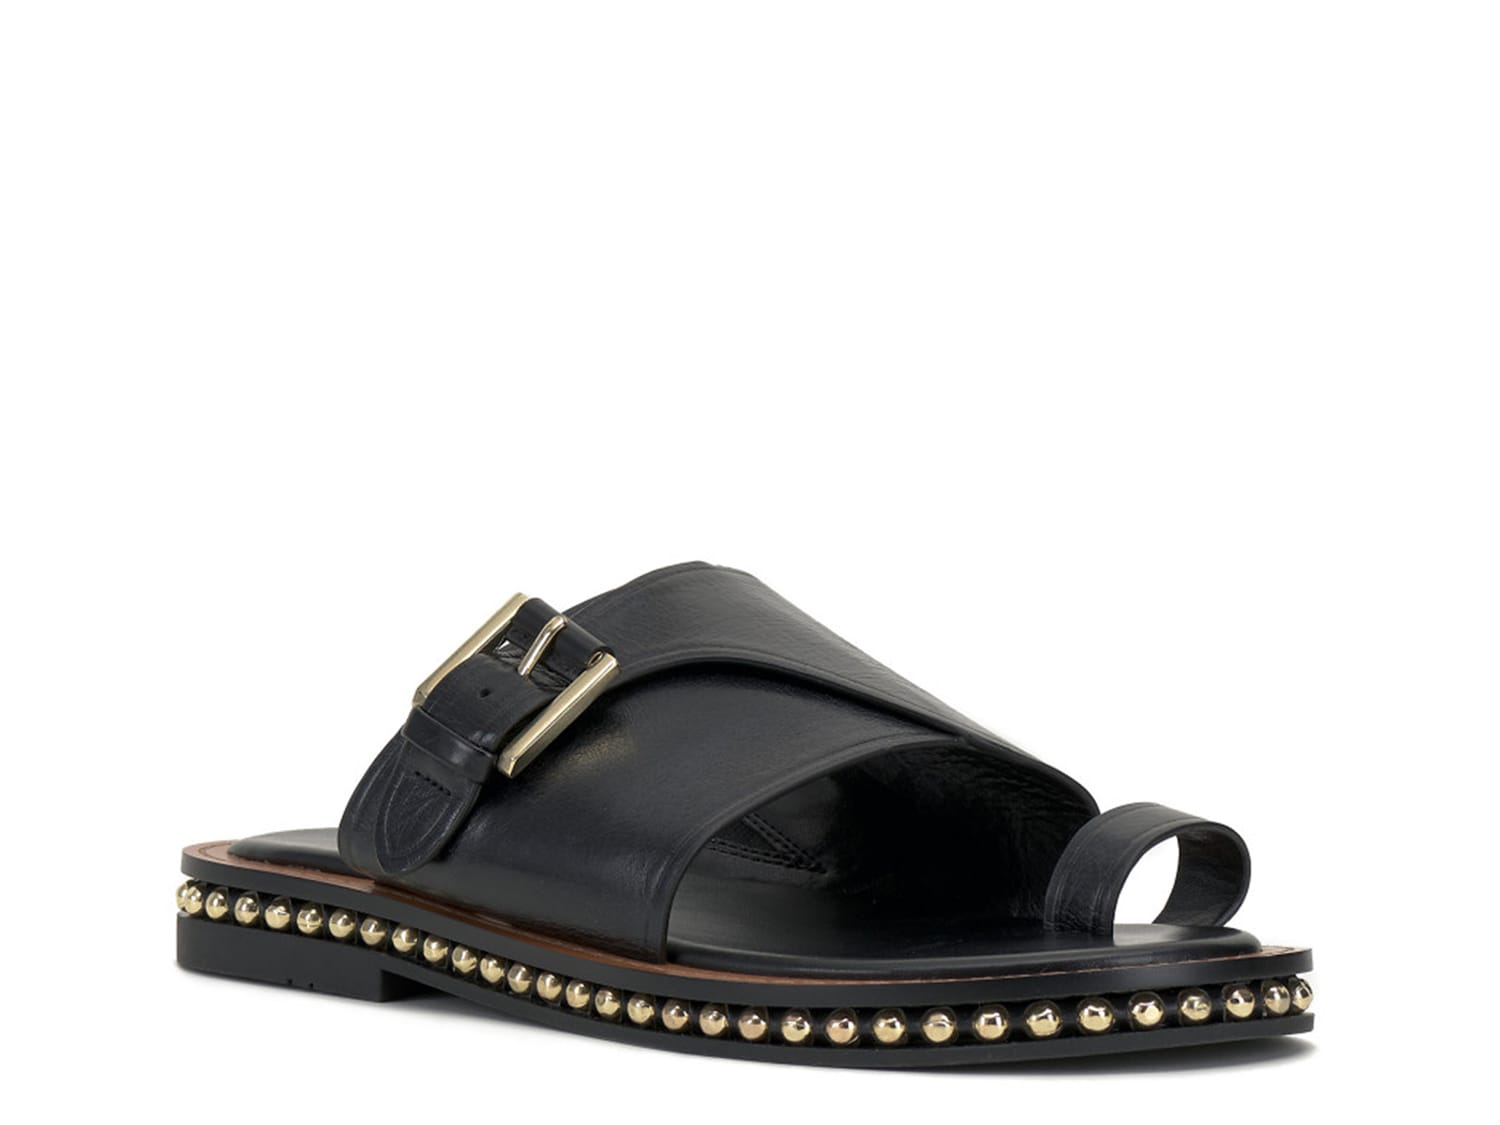 Vince Camuto Cooliann Flat Sandal - Free Shipping | DSW